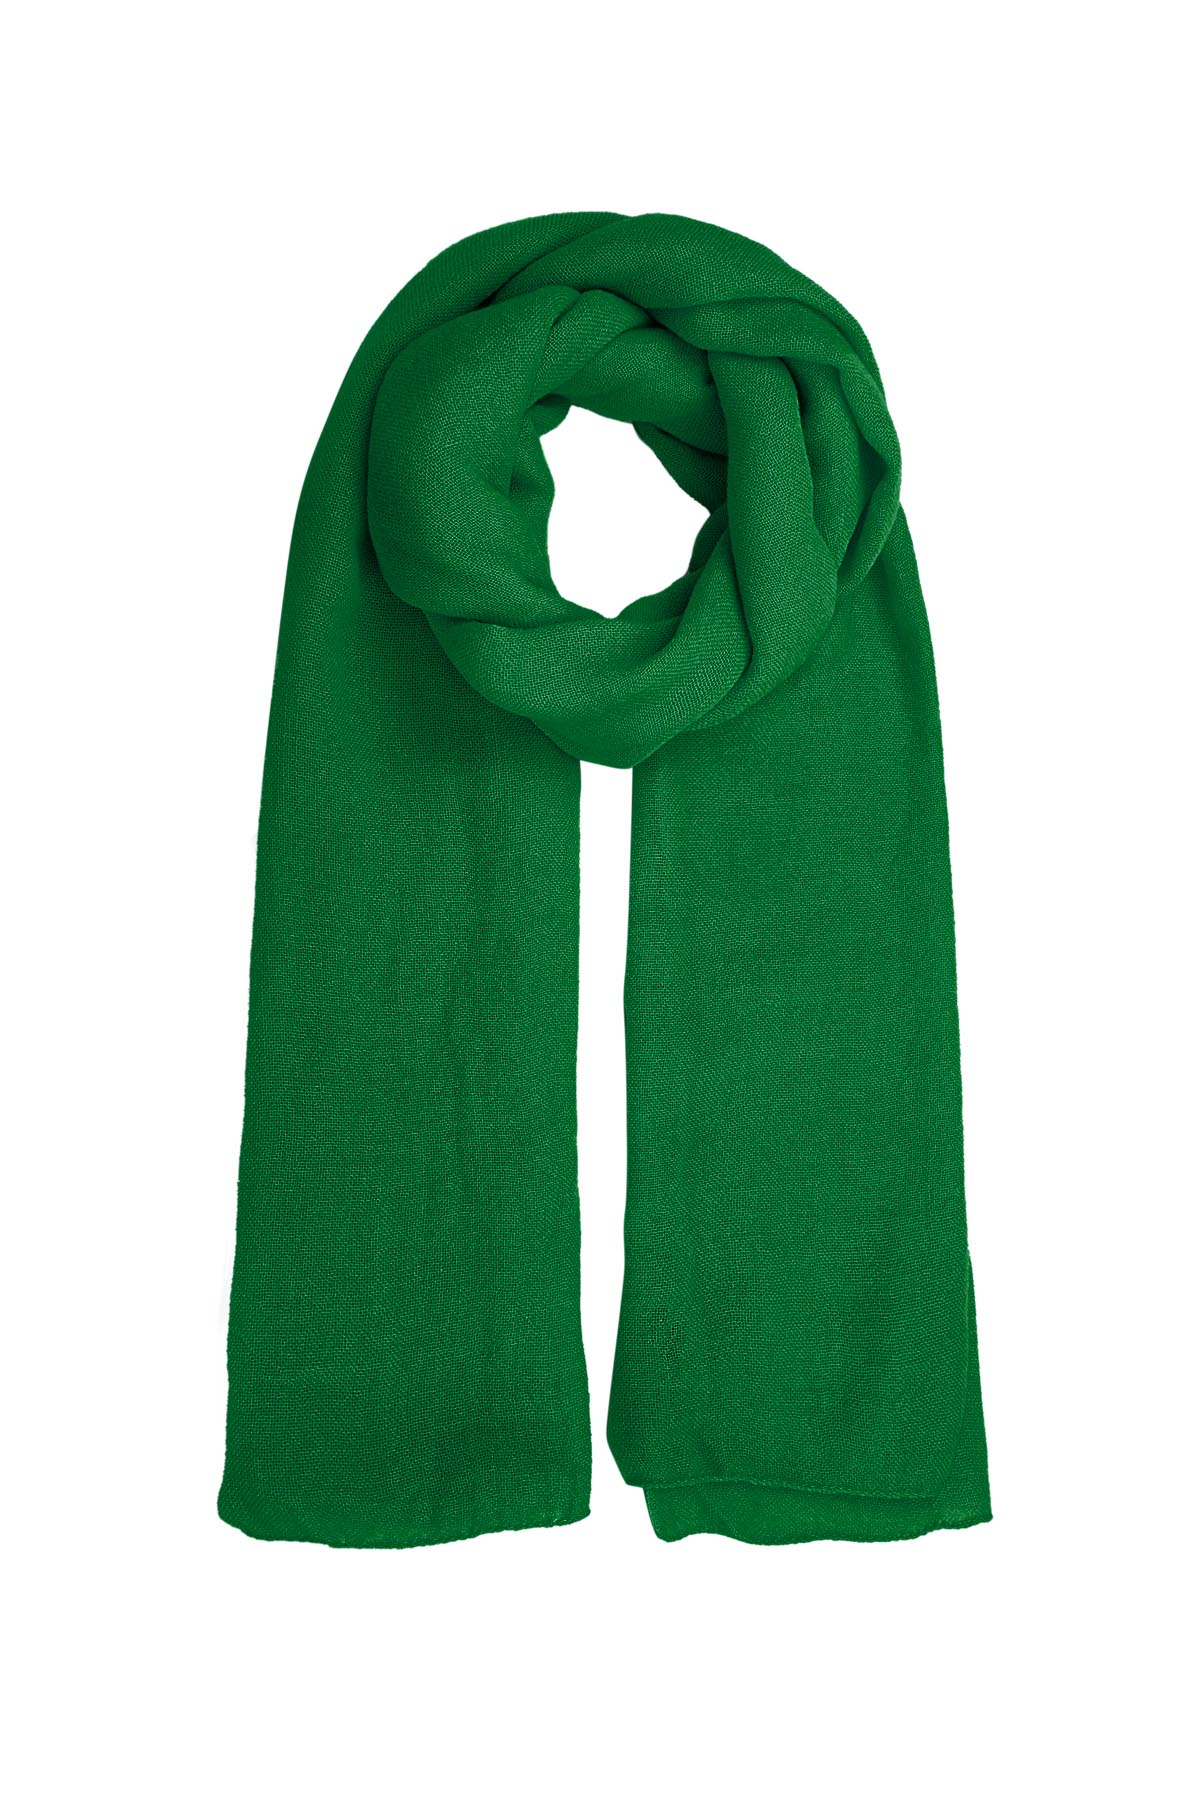 Scarf solid color - peacock green